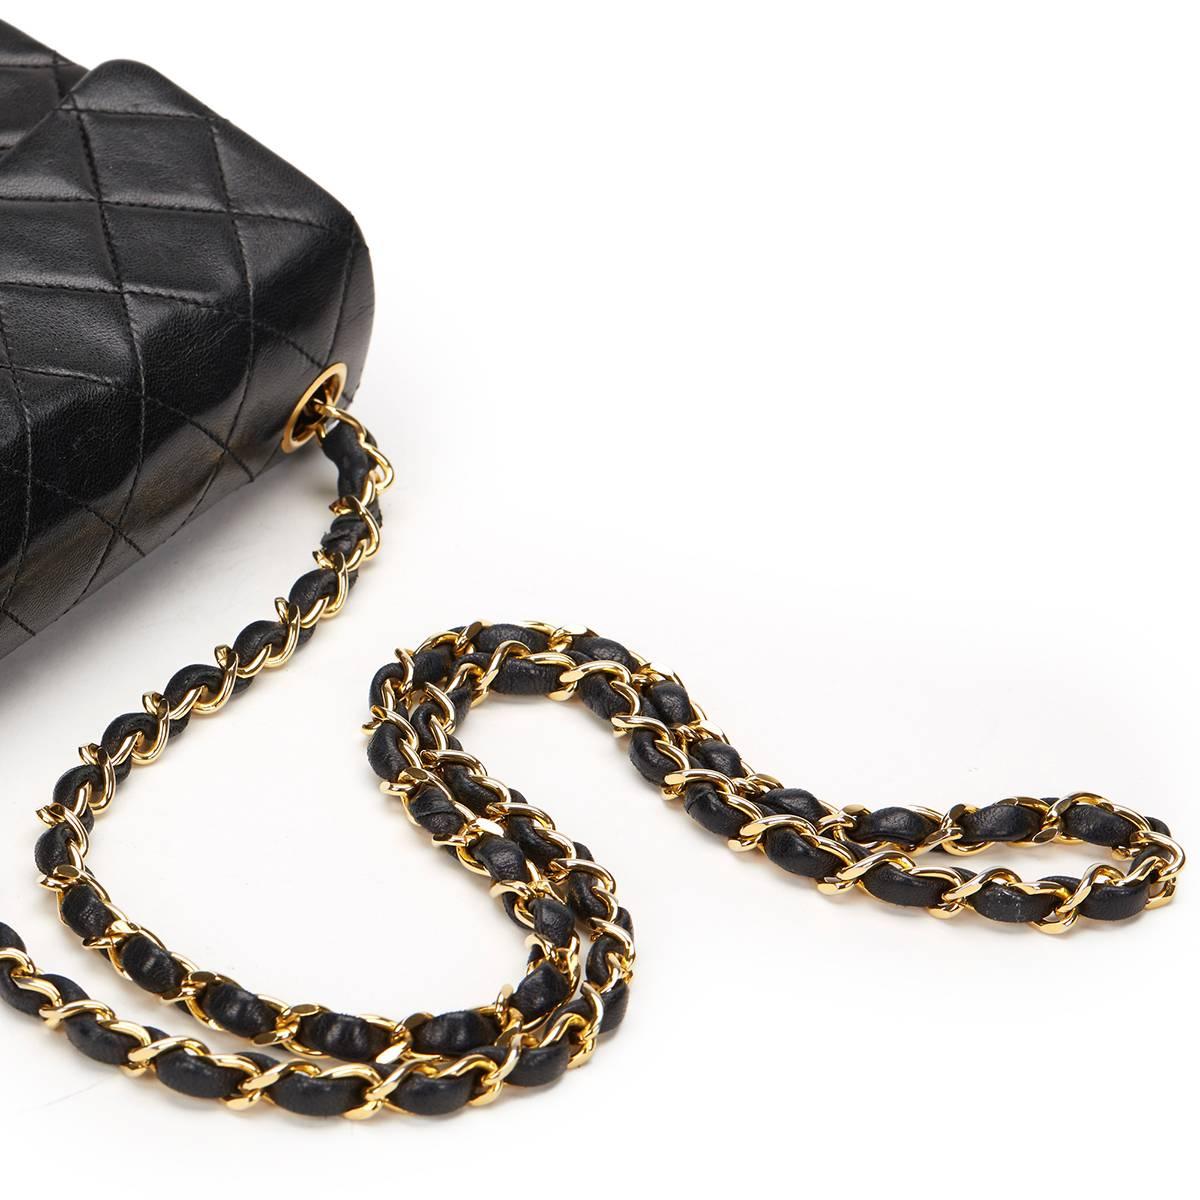 1980s Chanel Black Quilted Lambskin Vintage Mini Flap Bag 2